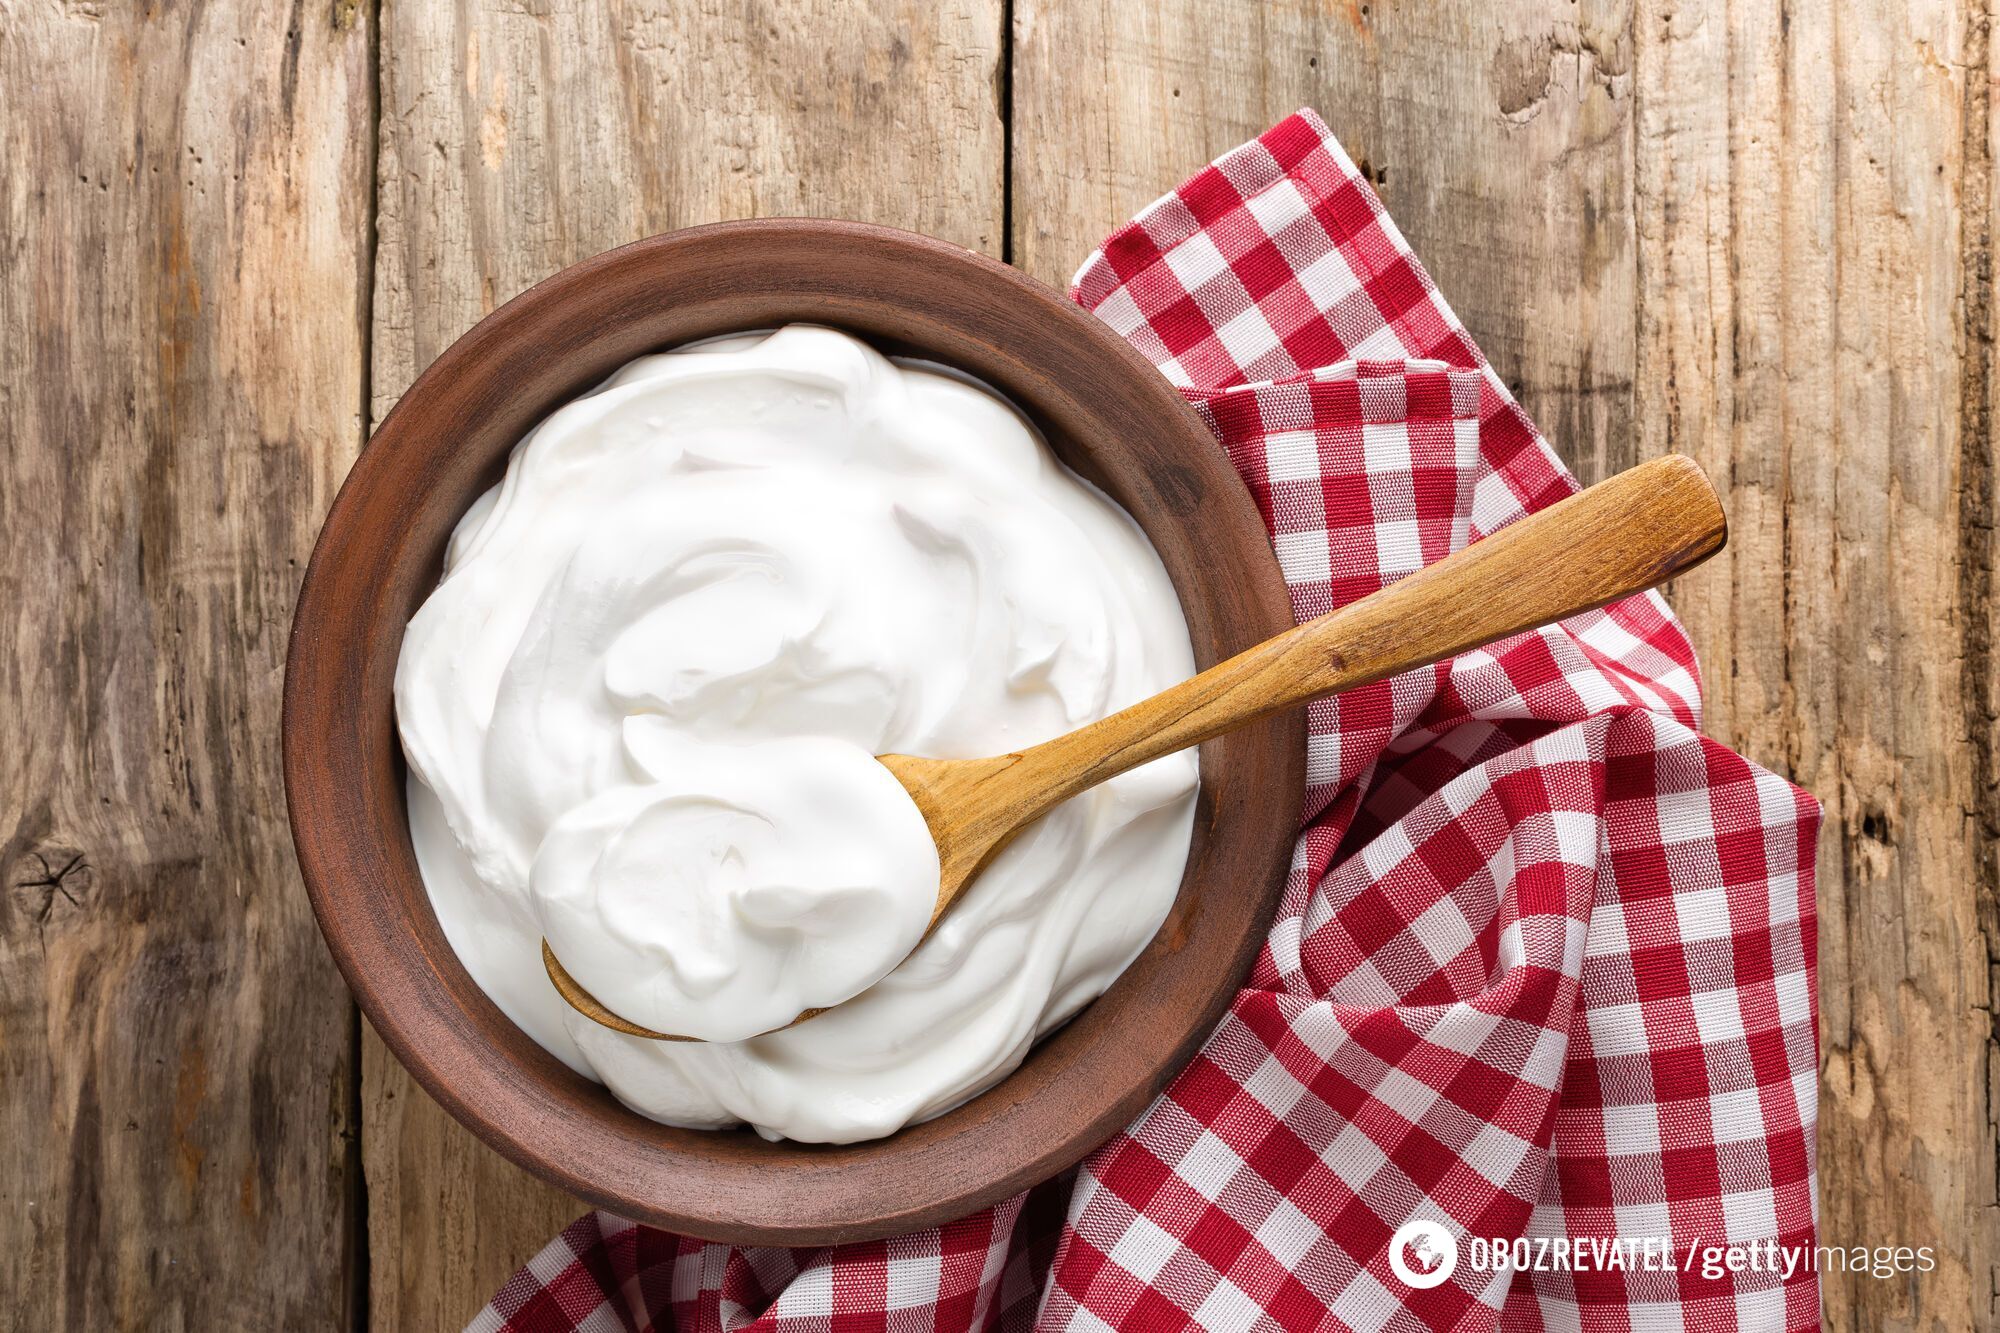 How to choose high-quality and natural sour cream